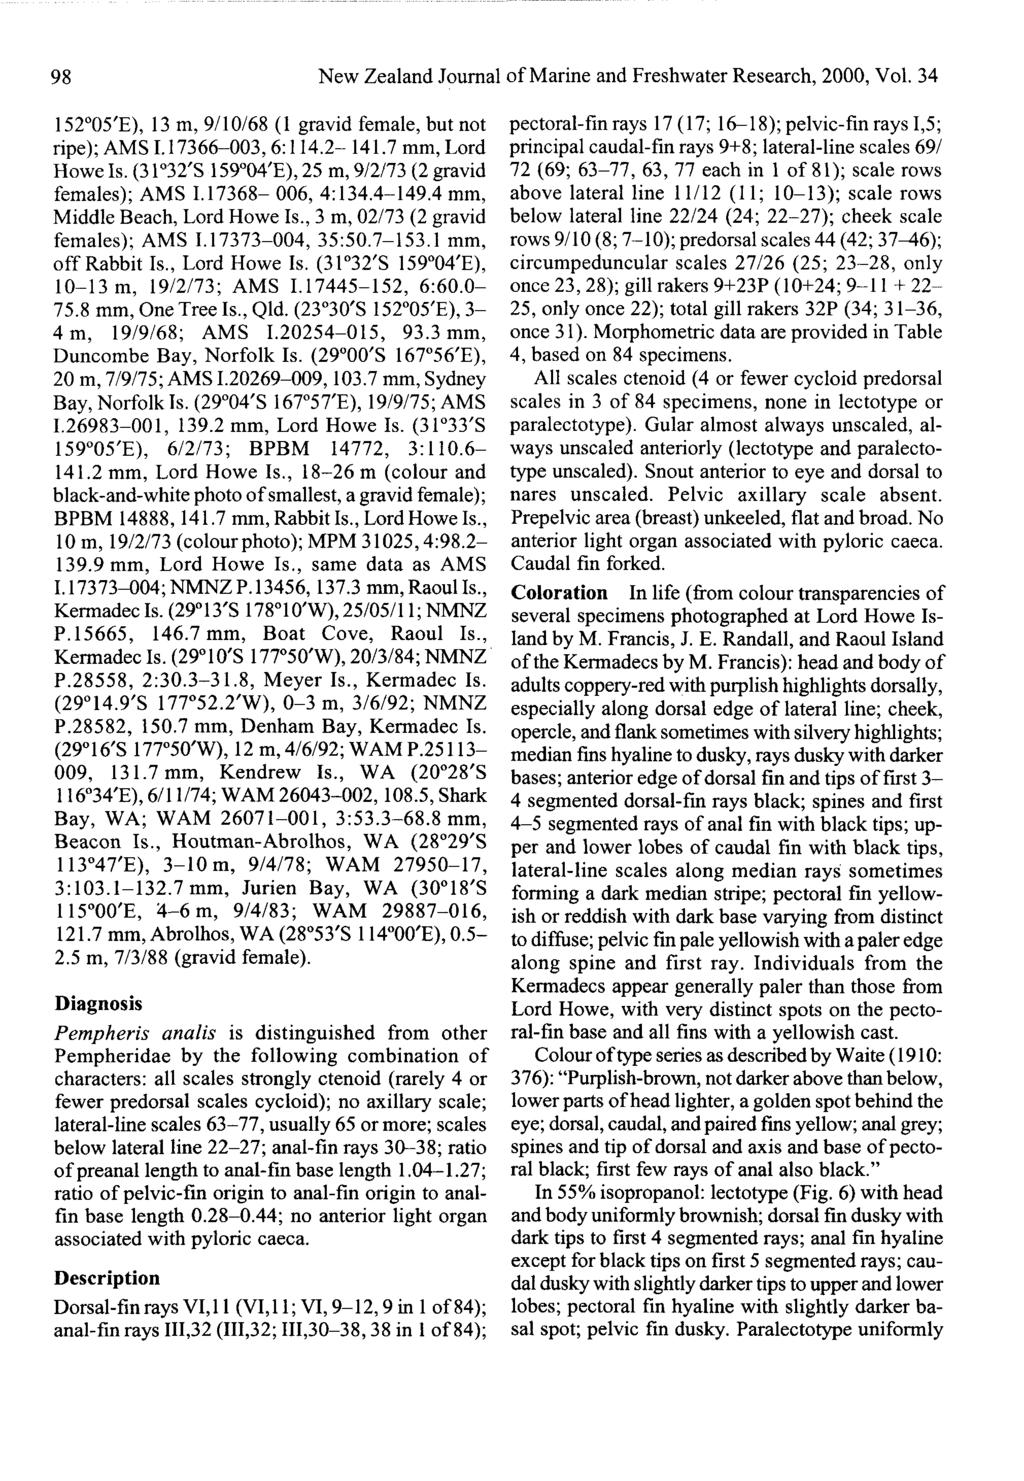 98 New Zealand Journal of Marine and Freshwater Research, 2000, Vol. 34 152 05'E), 13 m, 9/10/68 (1 gravid female, but not ripe); AMS 1.17366-003,6:114.2-141.7 mm, Lord Howe Is.